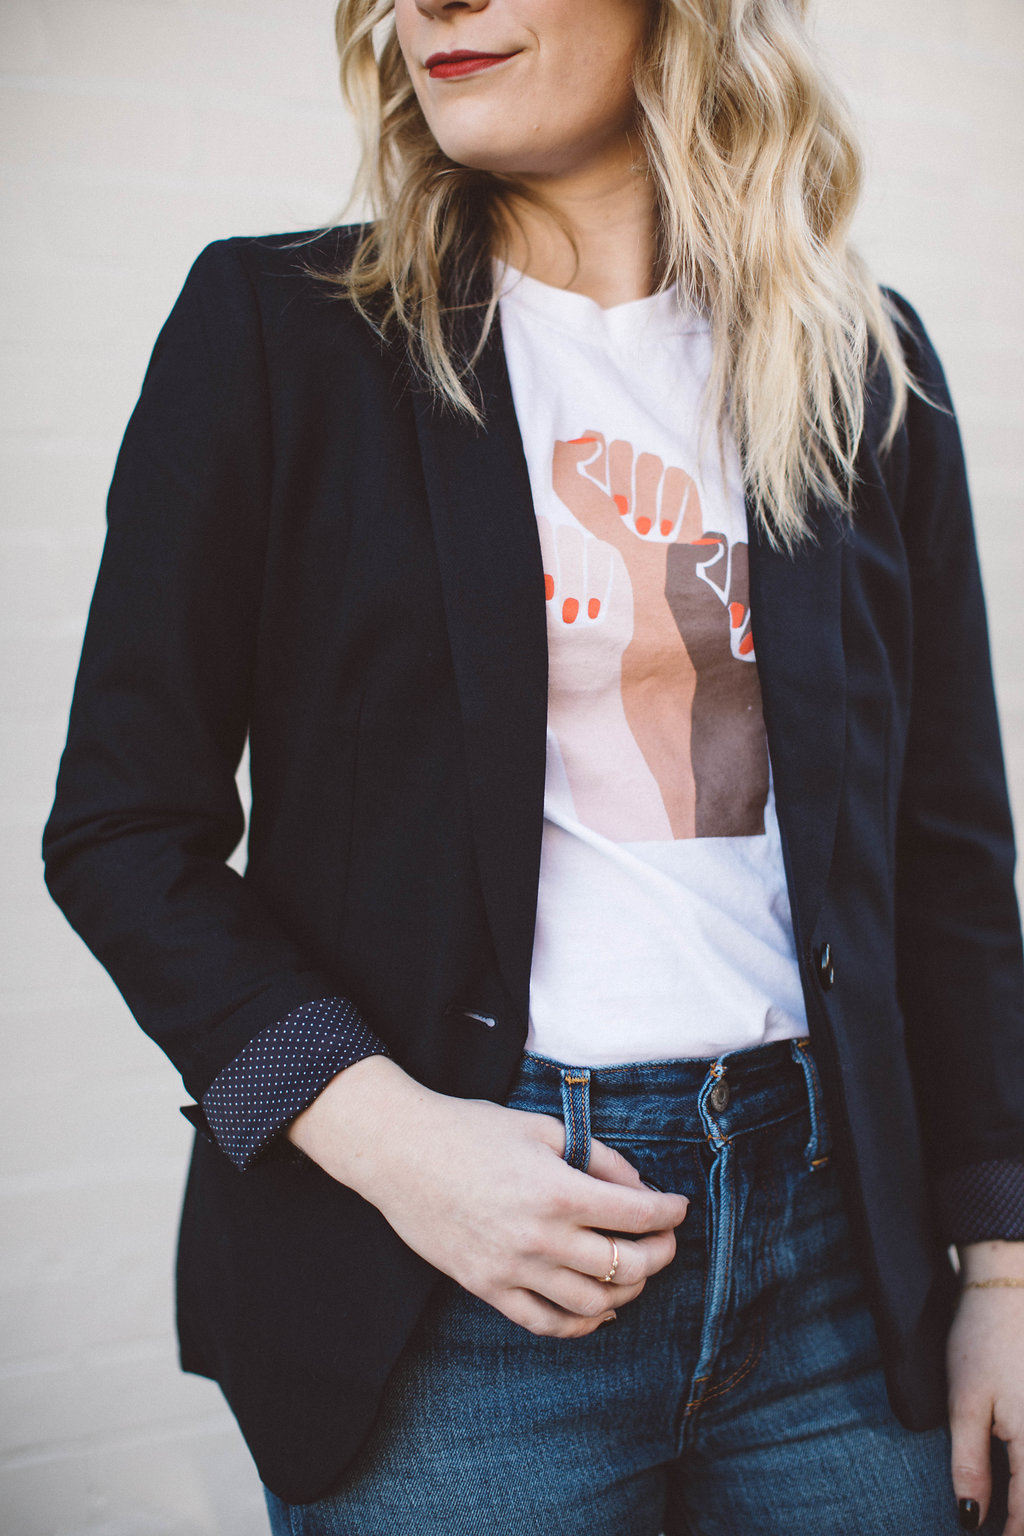 For All Womankind Tee worn with Levi's Wedgie Jeans, a J. Crew Blazer and Everlane Day Heels.